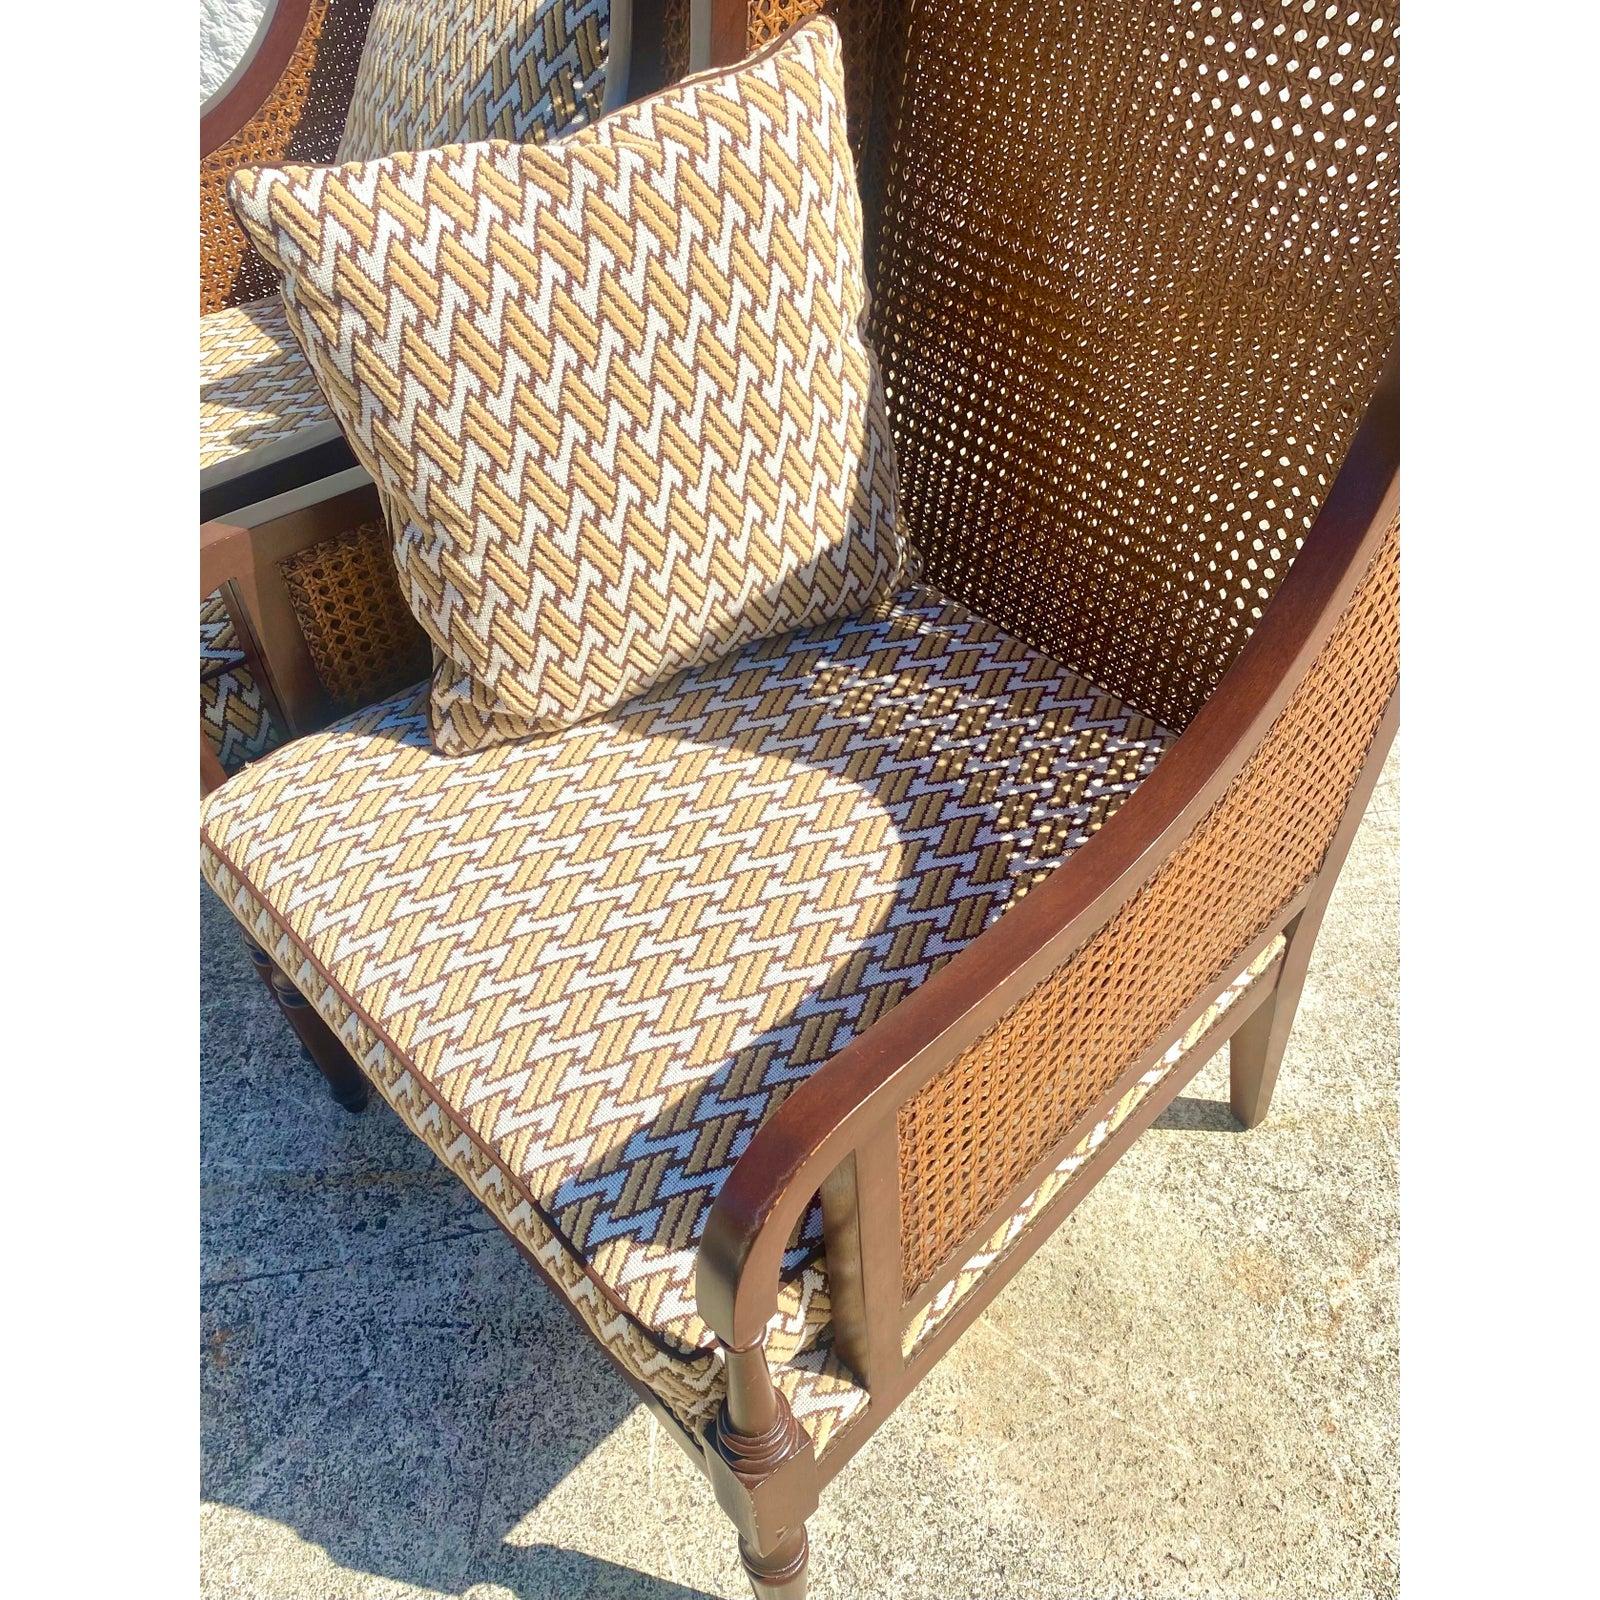 Fantastic pair of coastal wingback chairs. Beautiful high back profile with inset cane panels. Upholstered in a classic David Hicks print. Acquired from a Palm Beach estate.